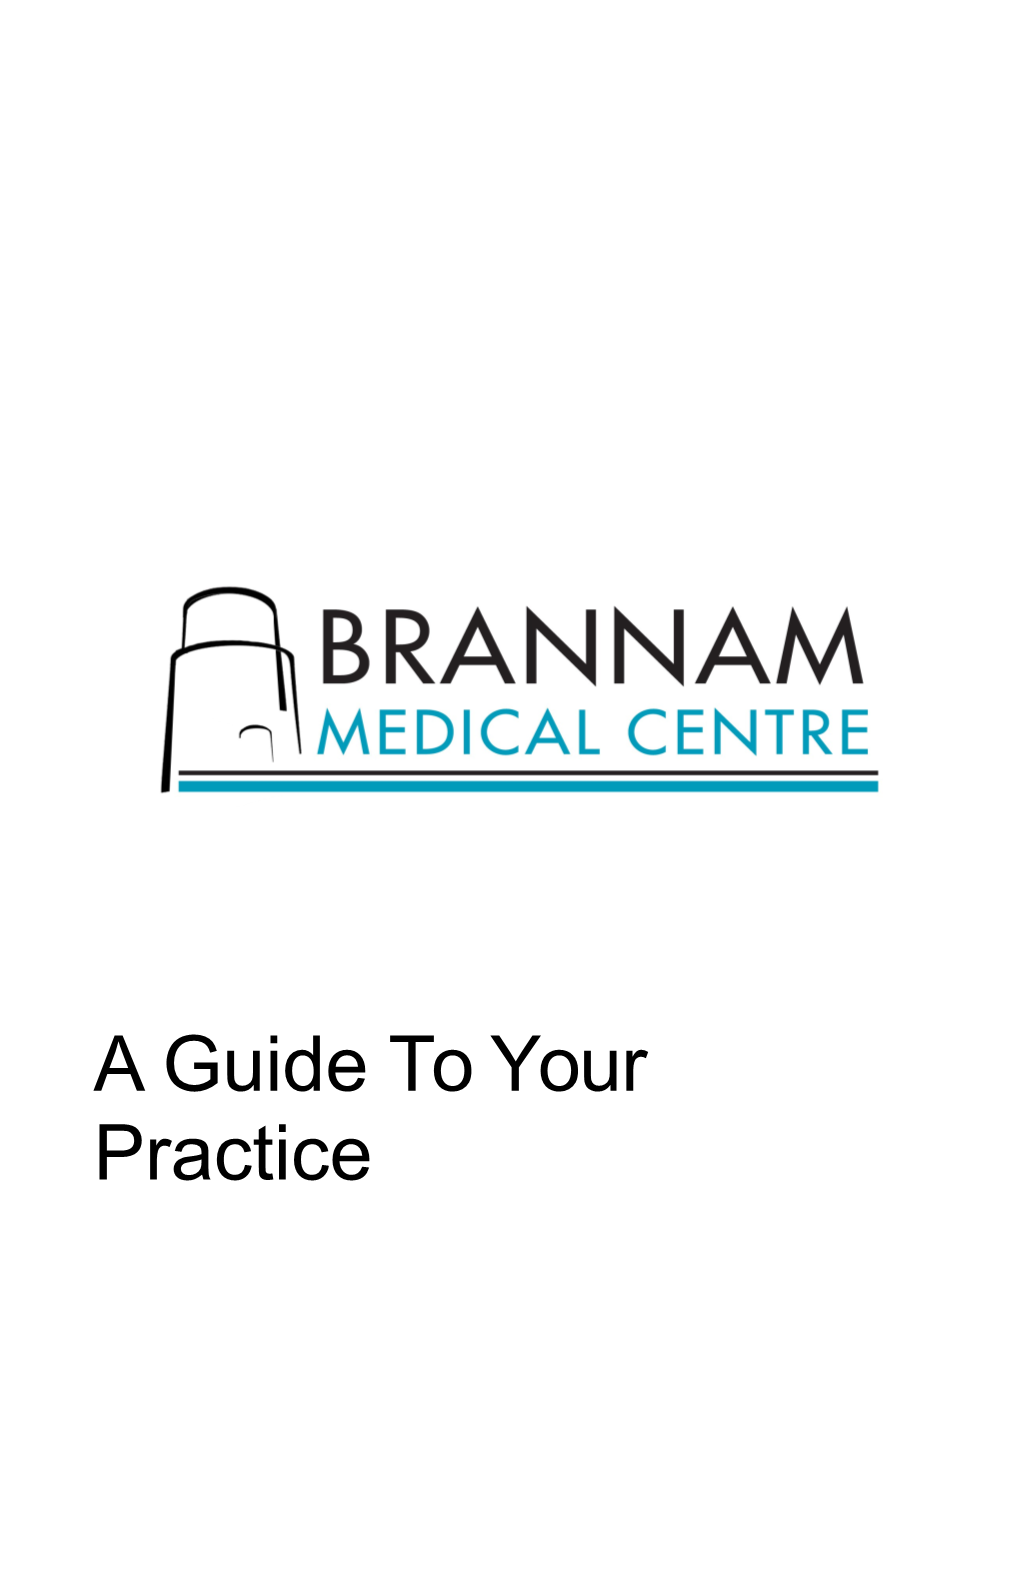 Welcome to Brannam Medical Centre